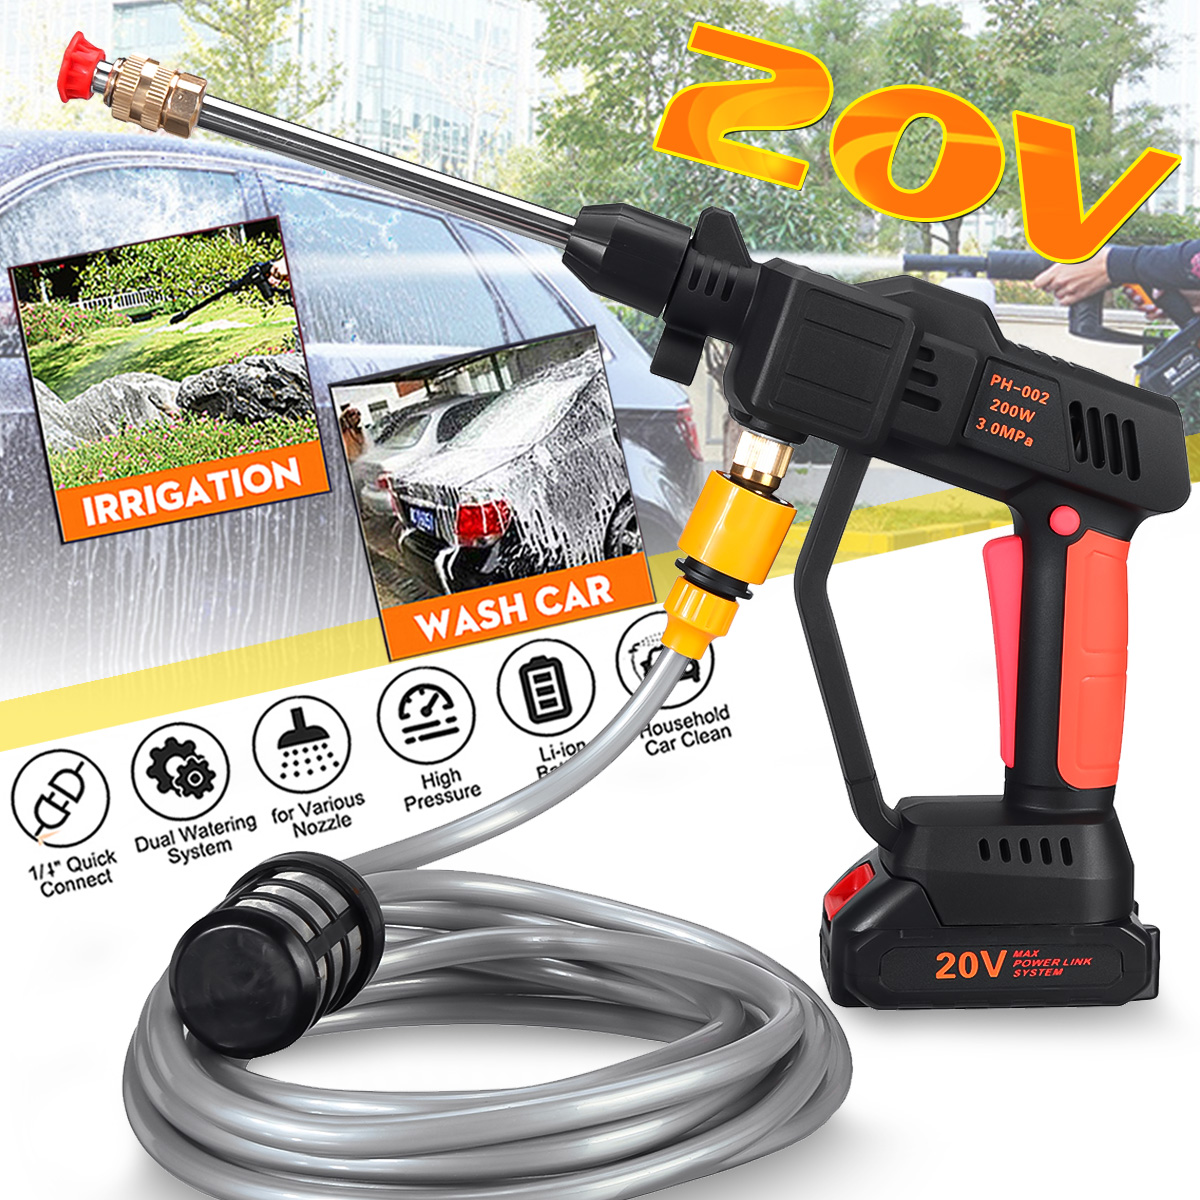 200W-Cordless-High-Pressure-Spayer-Guns-portable-Car-Washer-Vehicle-Cleaning-Tool-W-12-Battery-1872494-1